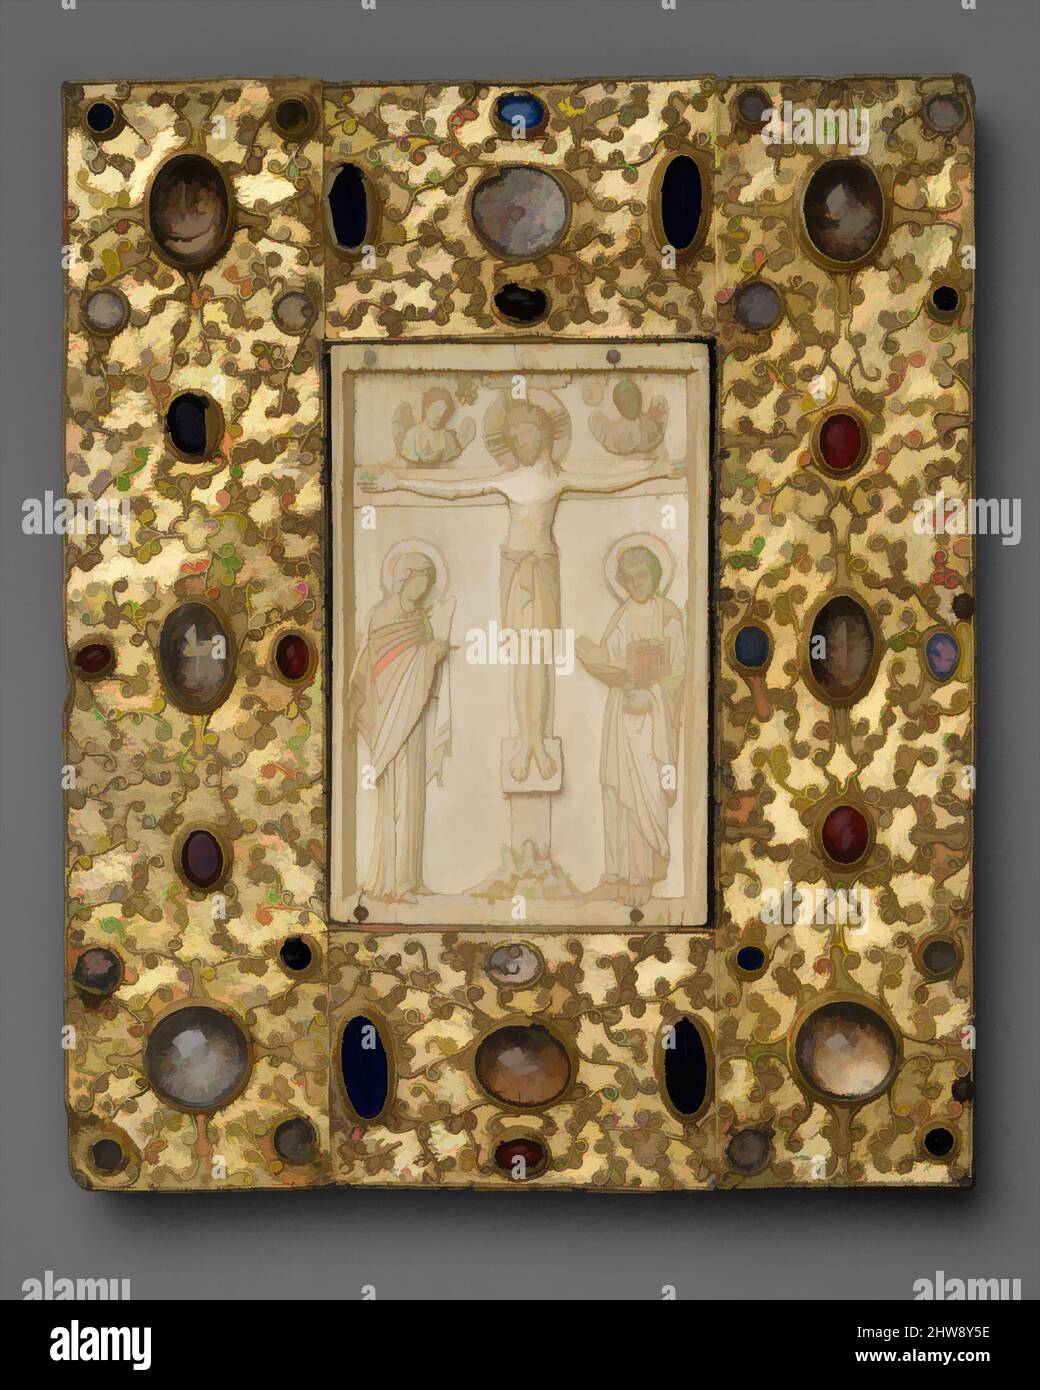 Art inspired by Book Cover with Byzantine Icon of the Crucifixion, 1000 (ivory); before 1085 (setting), Made in Constantinople (Ivory); Made in Jaca, Spain (Setting), Byzantine (ivory); Spanish (setting), Silver-gilt with pseudo-filigree, glass, crystal, and sapphire cabochons, ivory, Classic works modernized by Artotop with a splash of modernity. Shapes, color and value, eye-catching visual impact on art. Emotions through freedom of artworks in a contemporary way. A timeless message pursuing a wildly creative new direction. Artists turning to the digital medium and creating the Artotop NFT Stock Photo